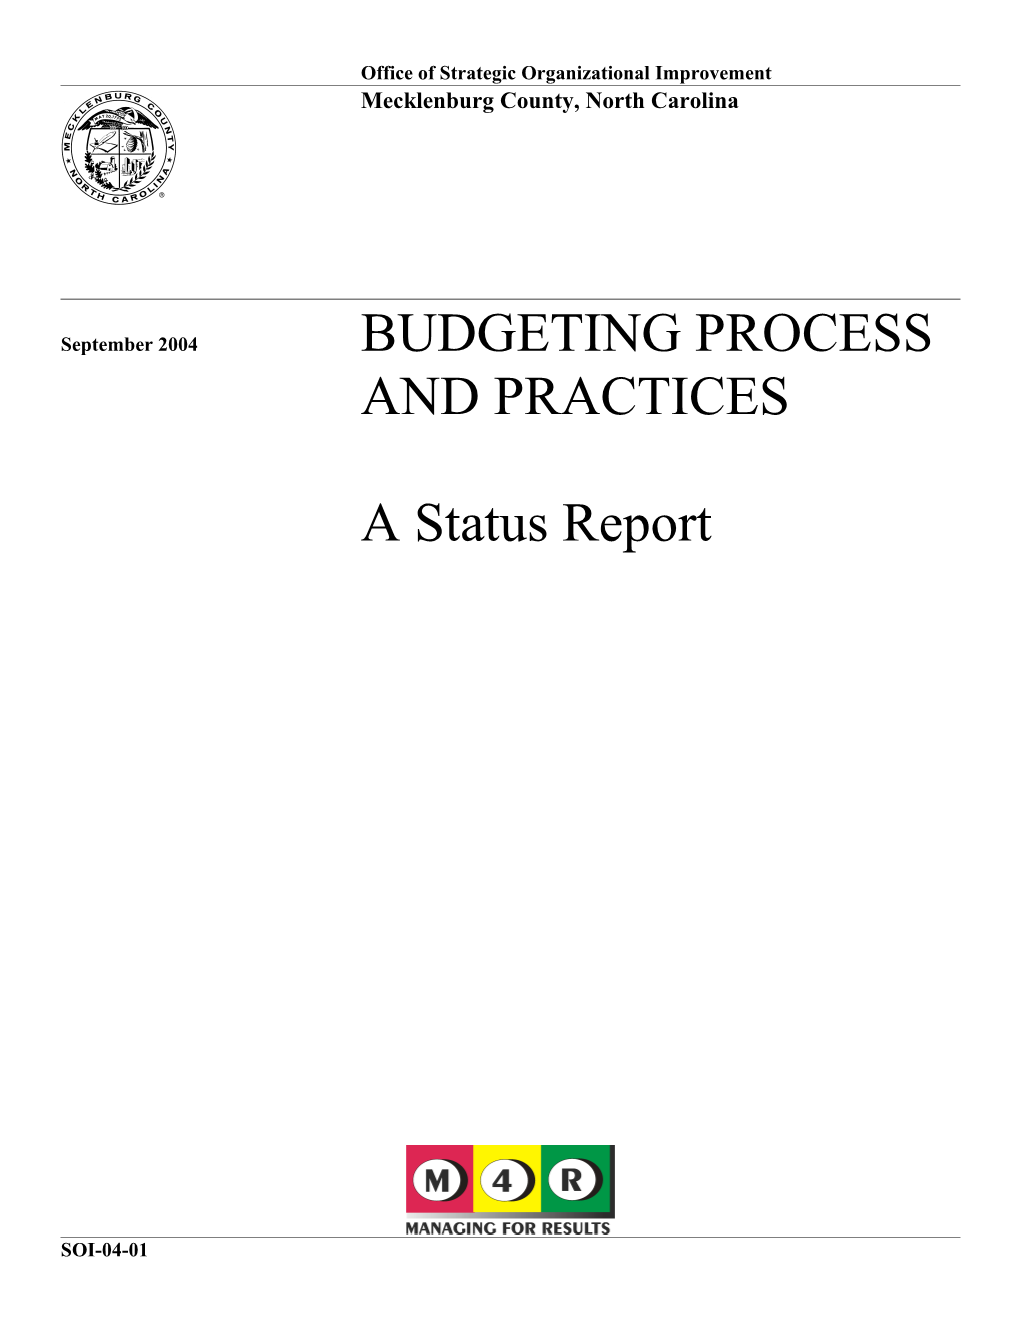 Budgeting Processes and Practices